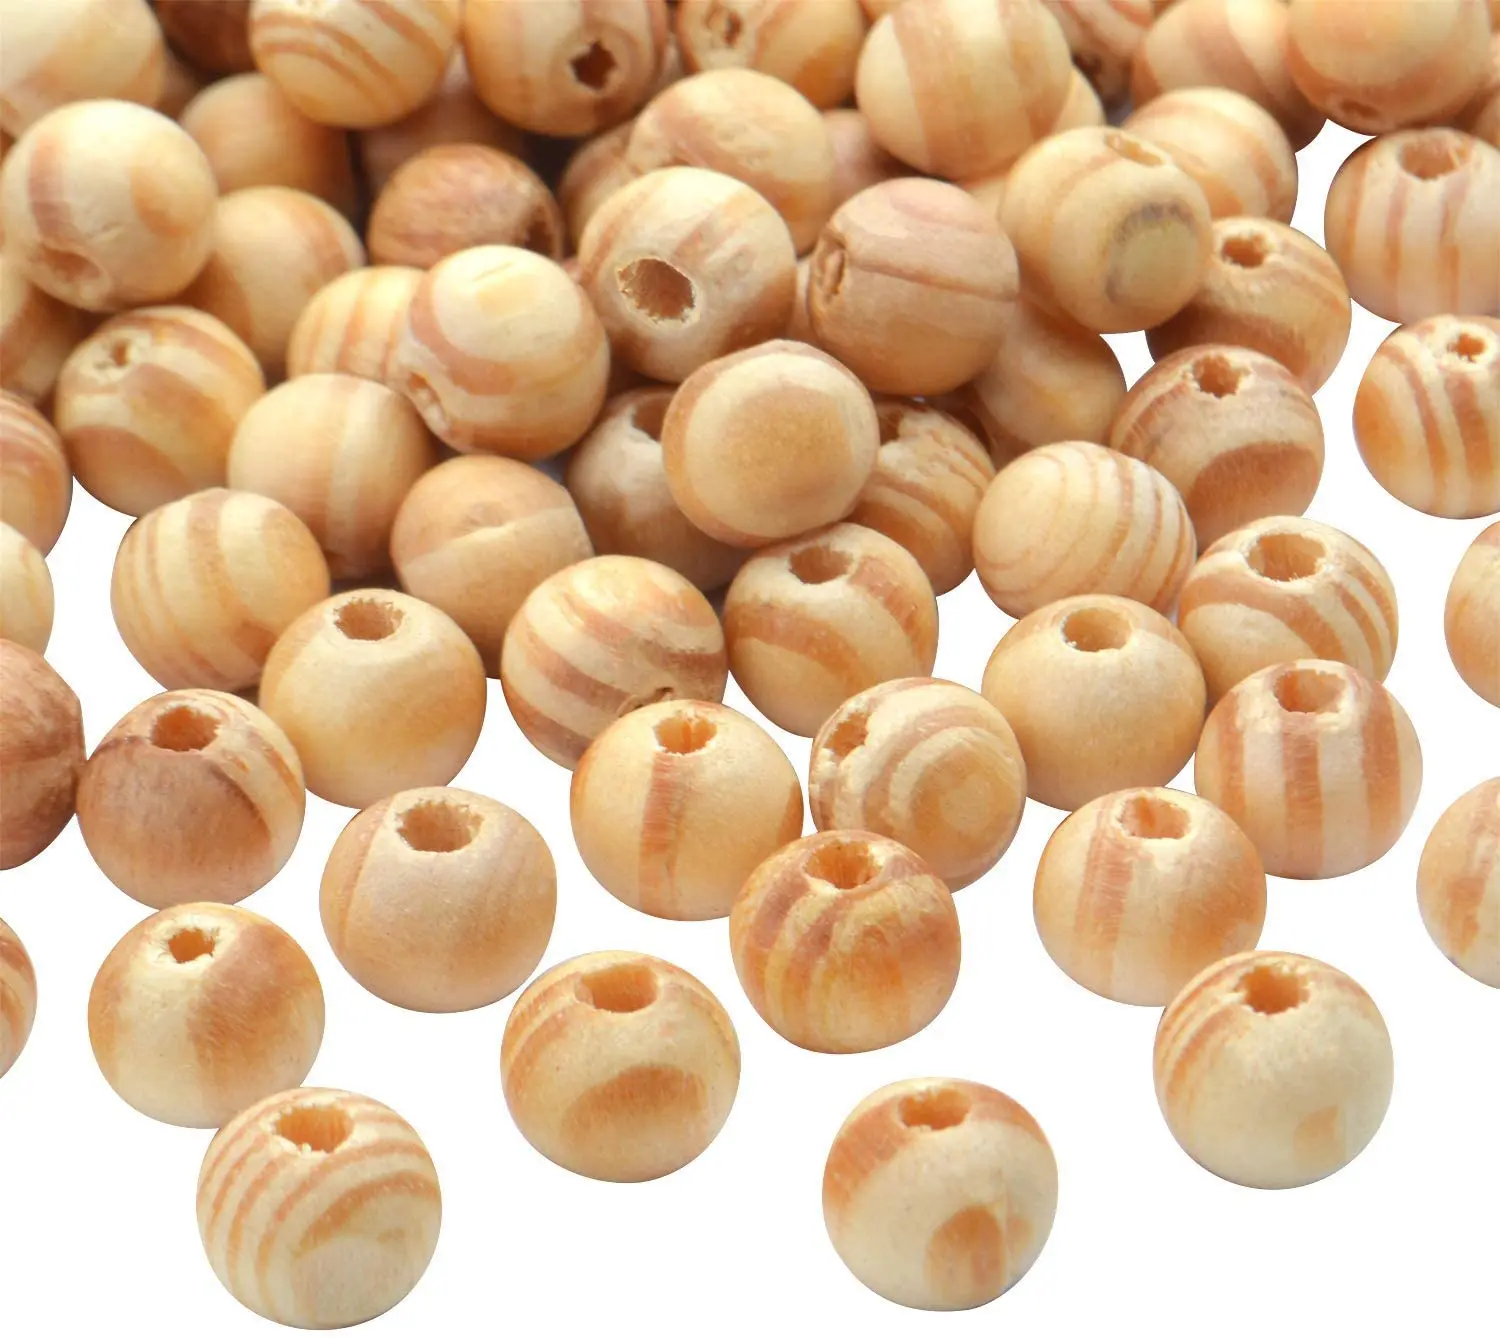 

300pcs 8mm Natural Round Wood Beads Unfinished Wooden Spacer Bead Loose Spacer Charm Beads for DIY Craft Jewelry Making,3mm Hole